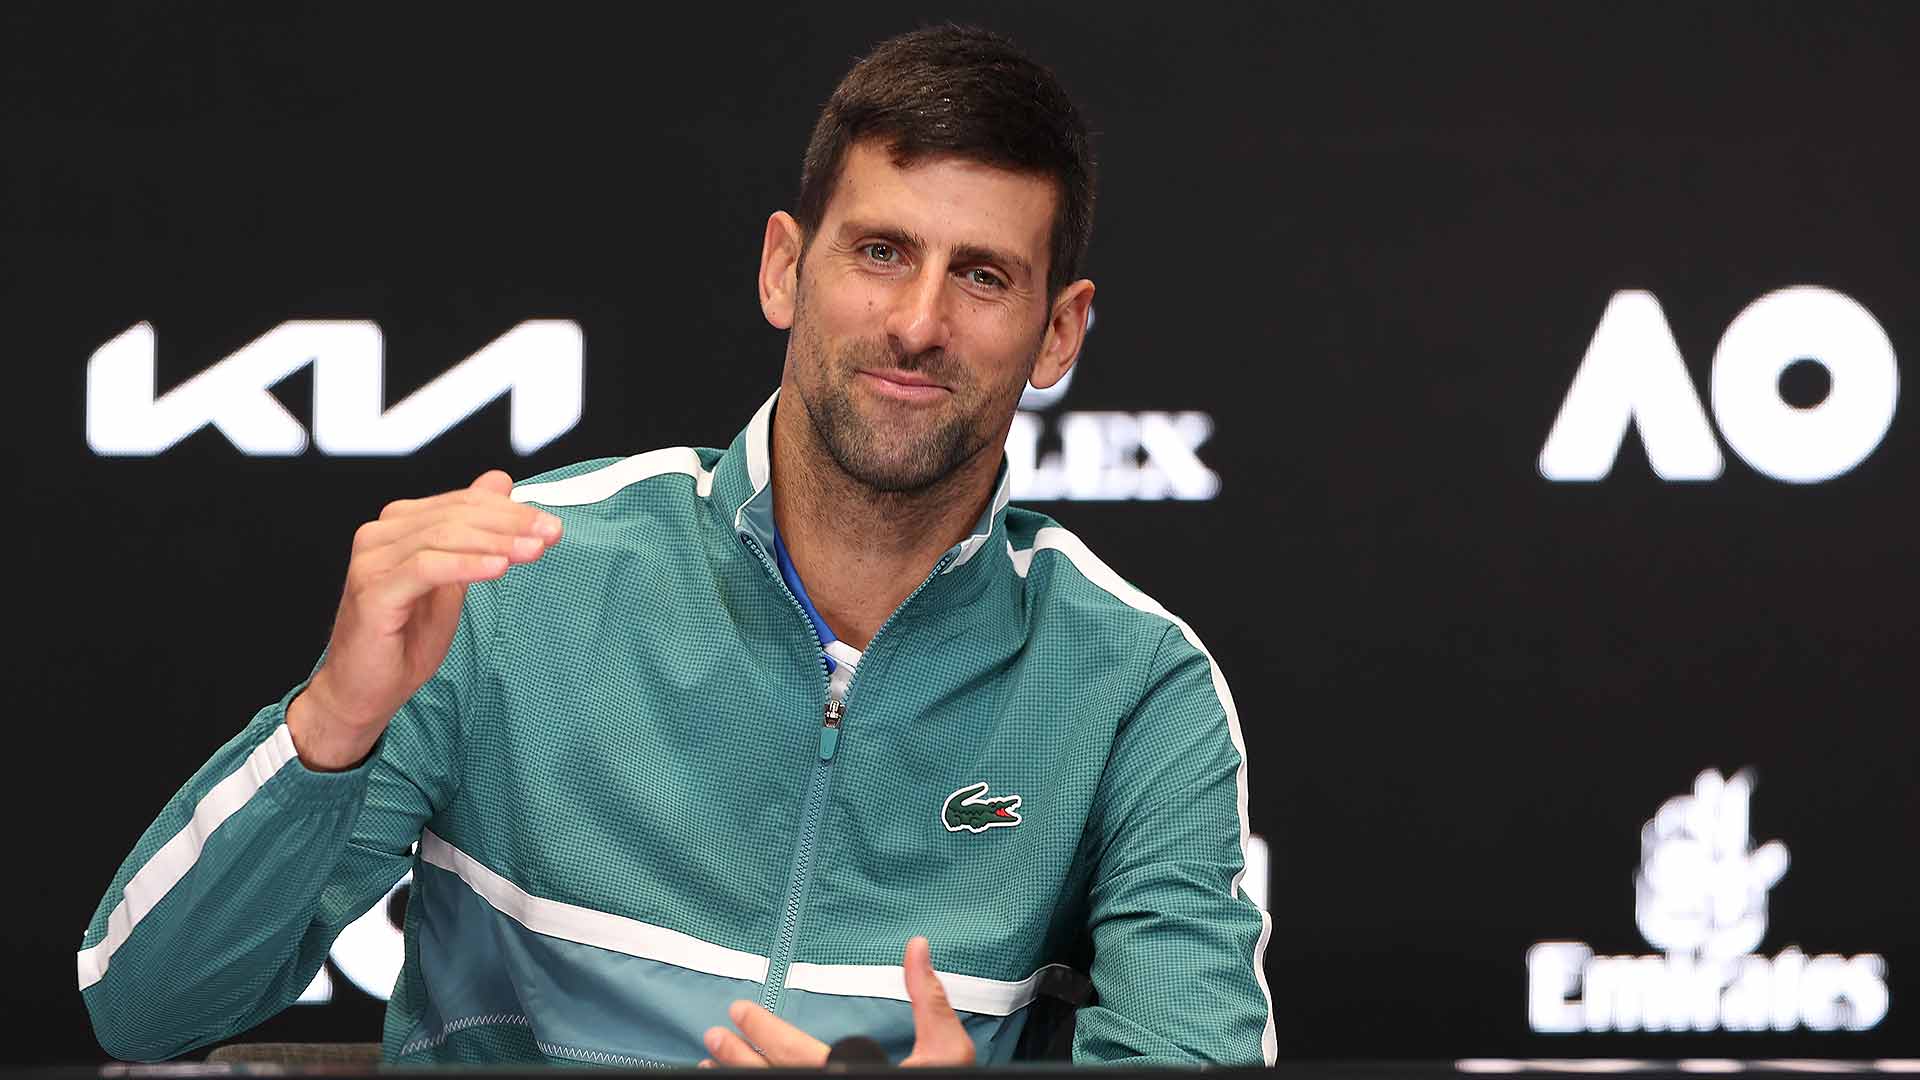 Novak Djokovic faces the media Saturday ahead of his opening-round match Sunday night at the Australian Open.